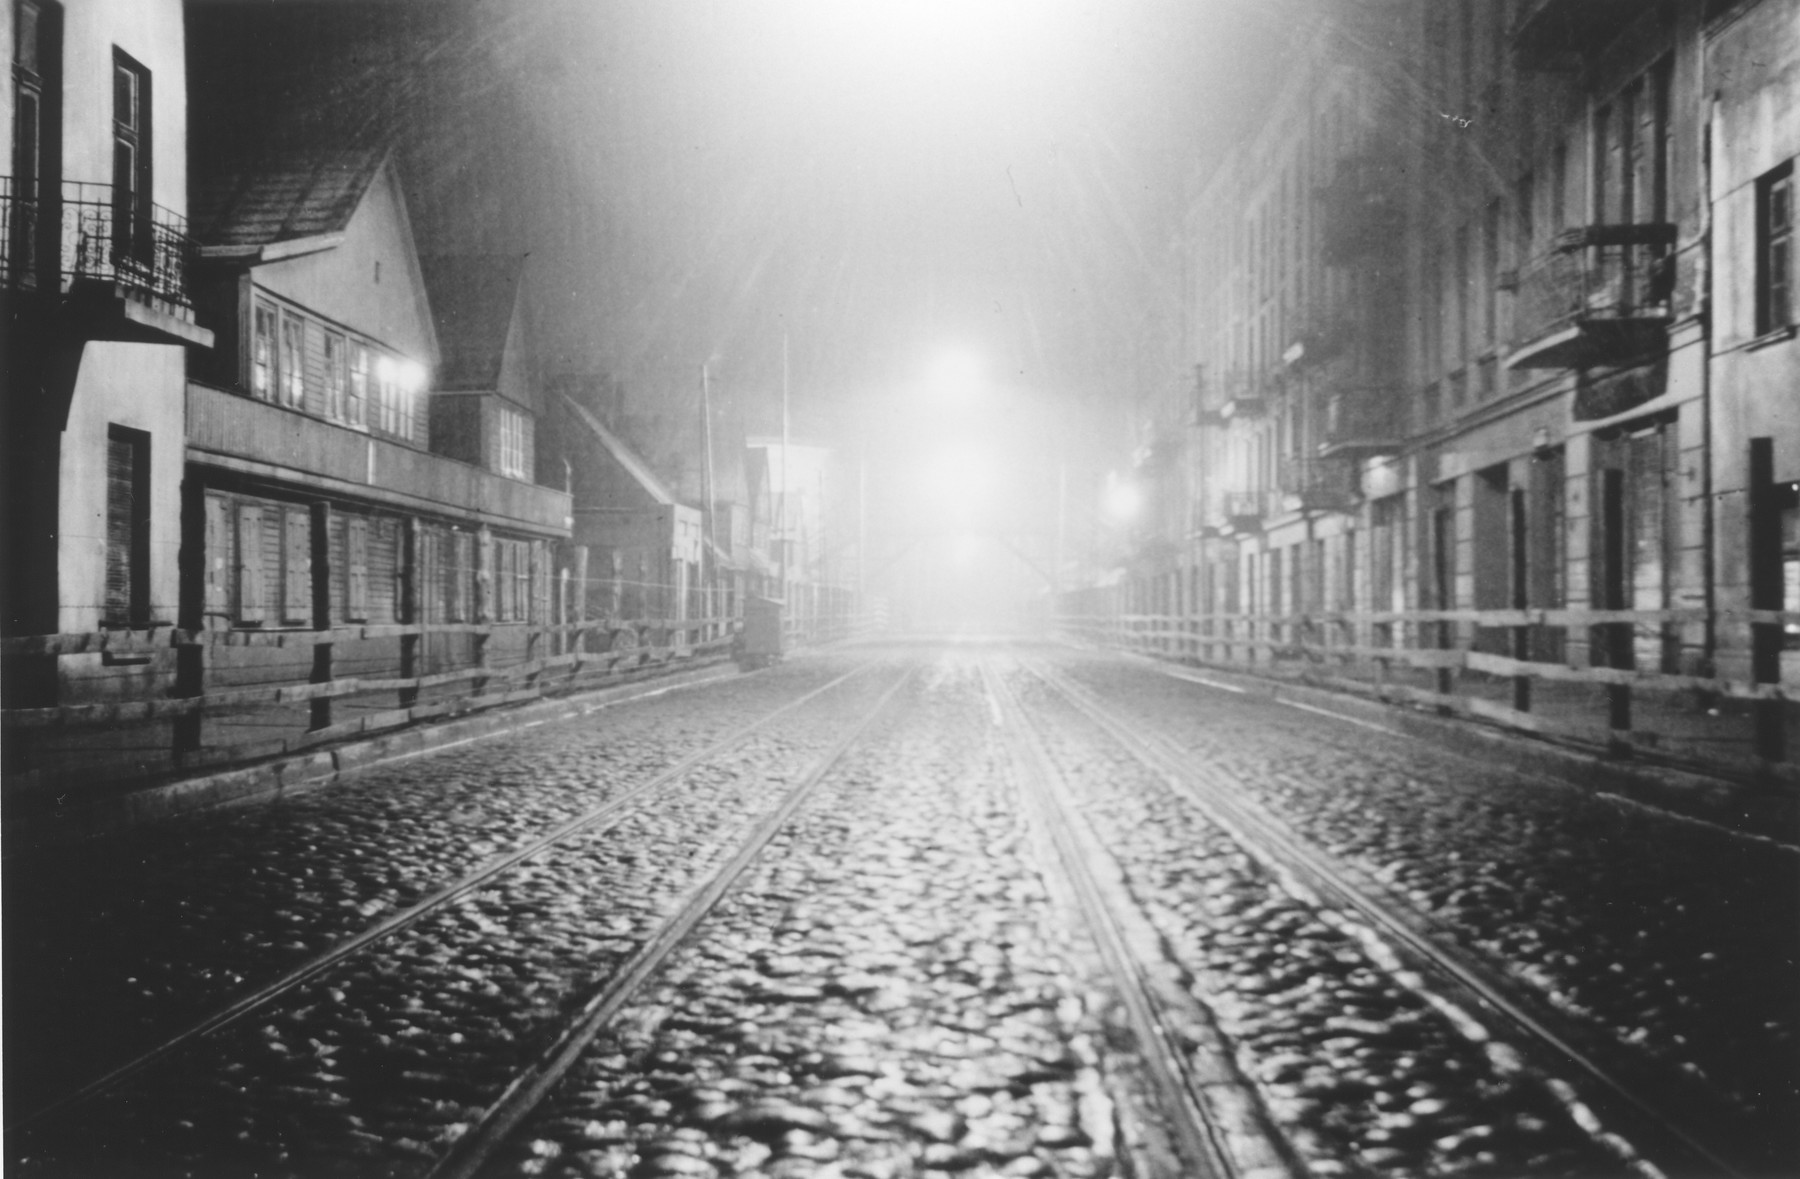 Night-time view of one of the thoroughfares that ran through the Lodz ghetto.

The photograph was probably taken by a member of Police Battalion 101.

The Lodz ghetto was divided into three sectors by two major throughfares which passed through, but did not belong to the Jewish district.  Wooden and barbed wire fences prevented access to these main streets by ghetto residents.  But Jews were allowed to traverse the streets by means of two wooden pedestrian bridges, accessed by steep staircases. 

One image from a photograph album belonging to a member of Police Battalion 101.